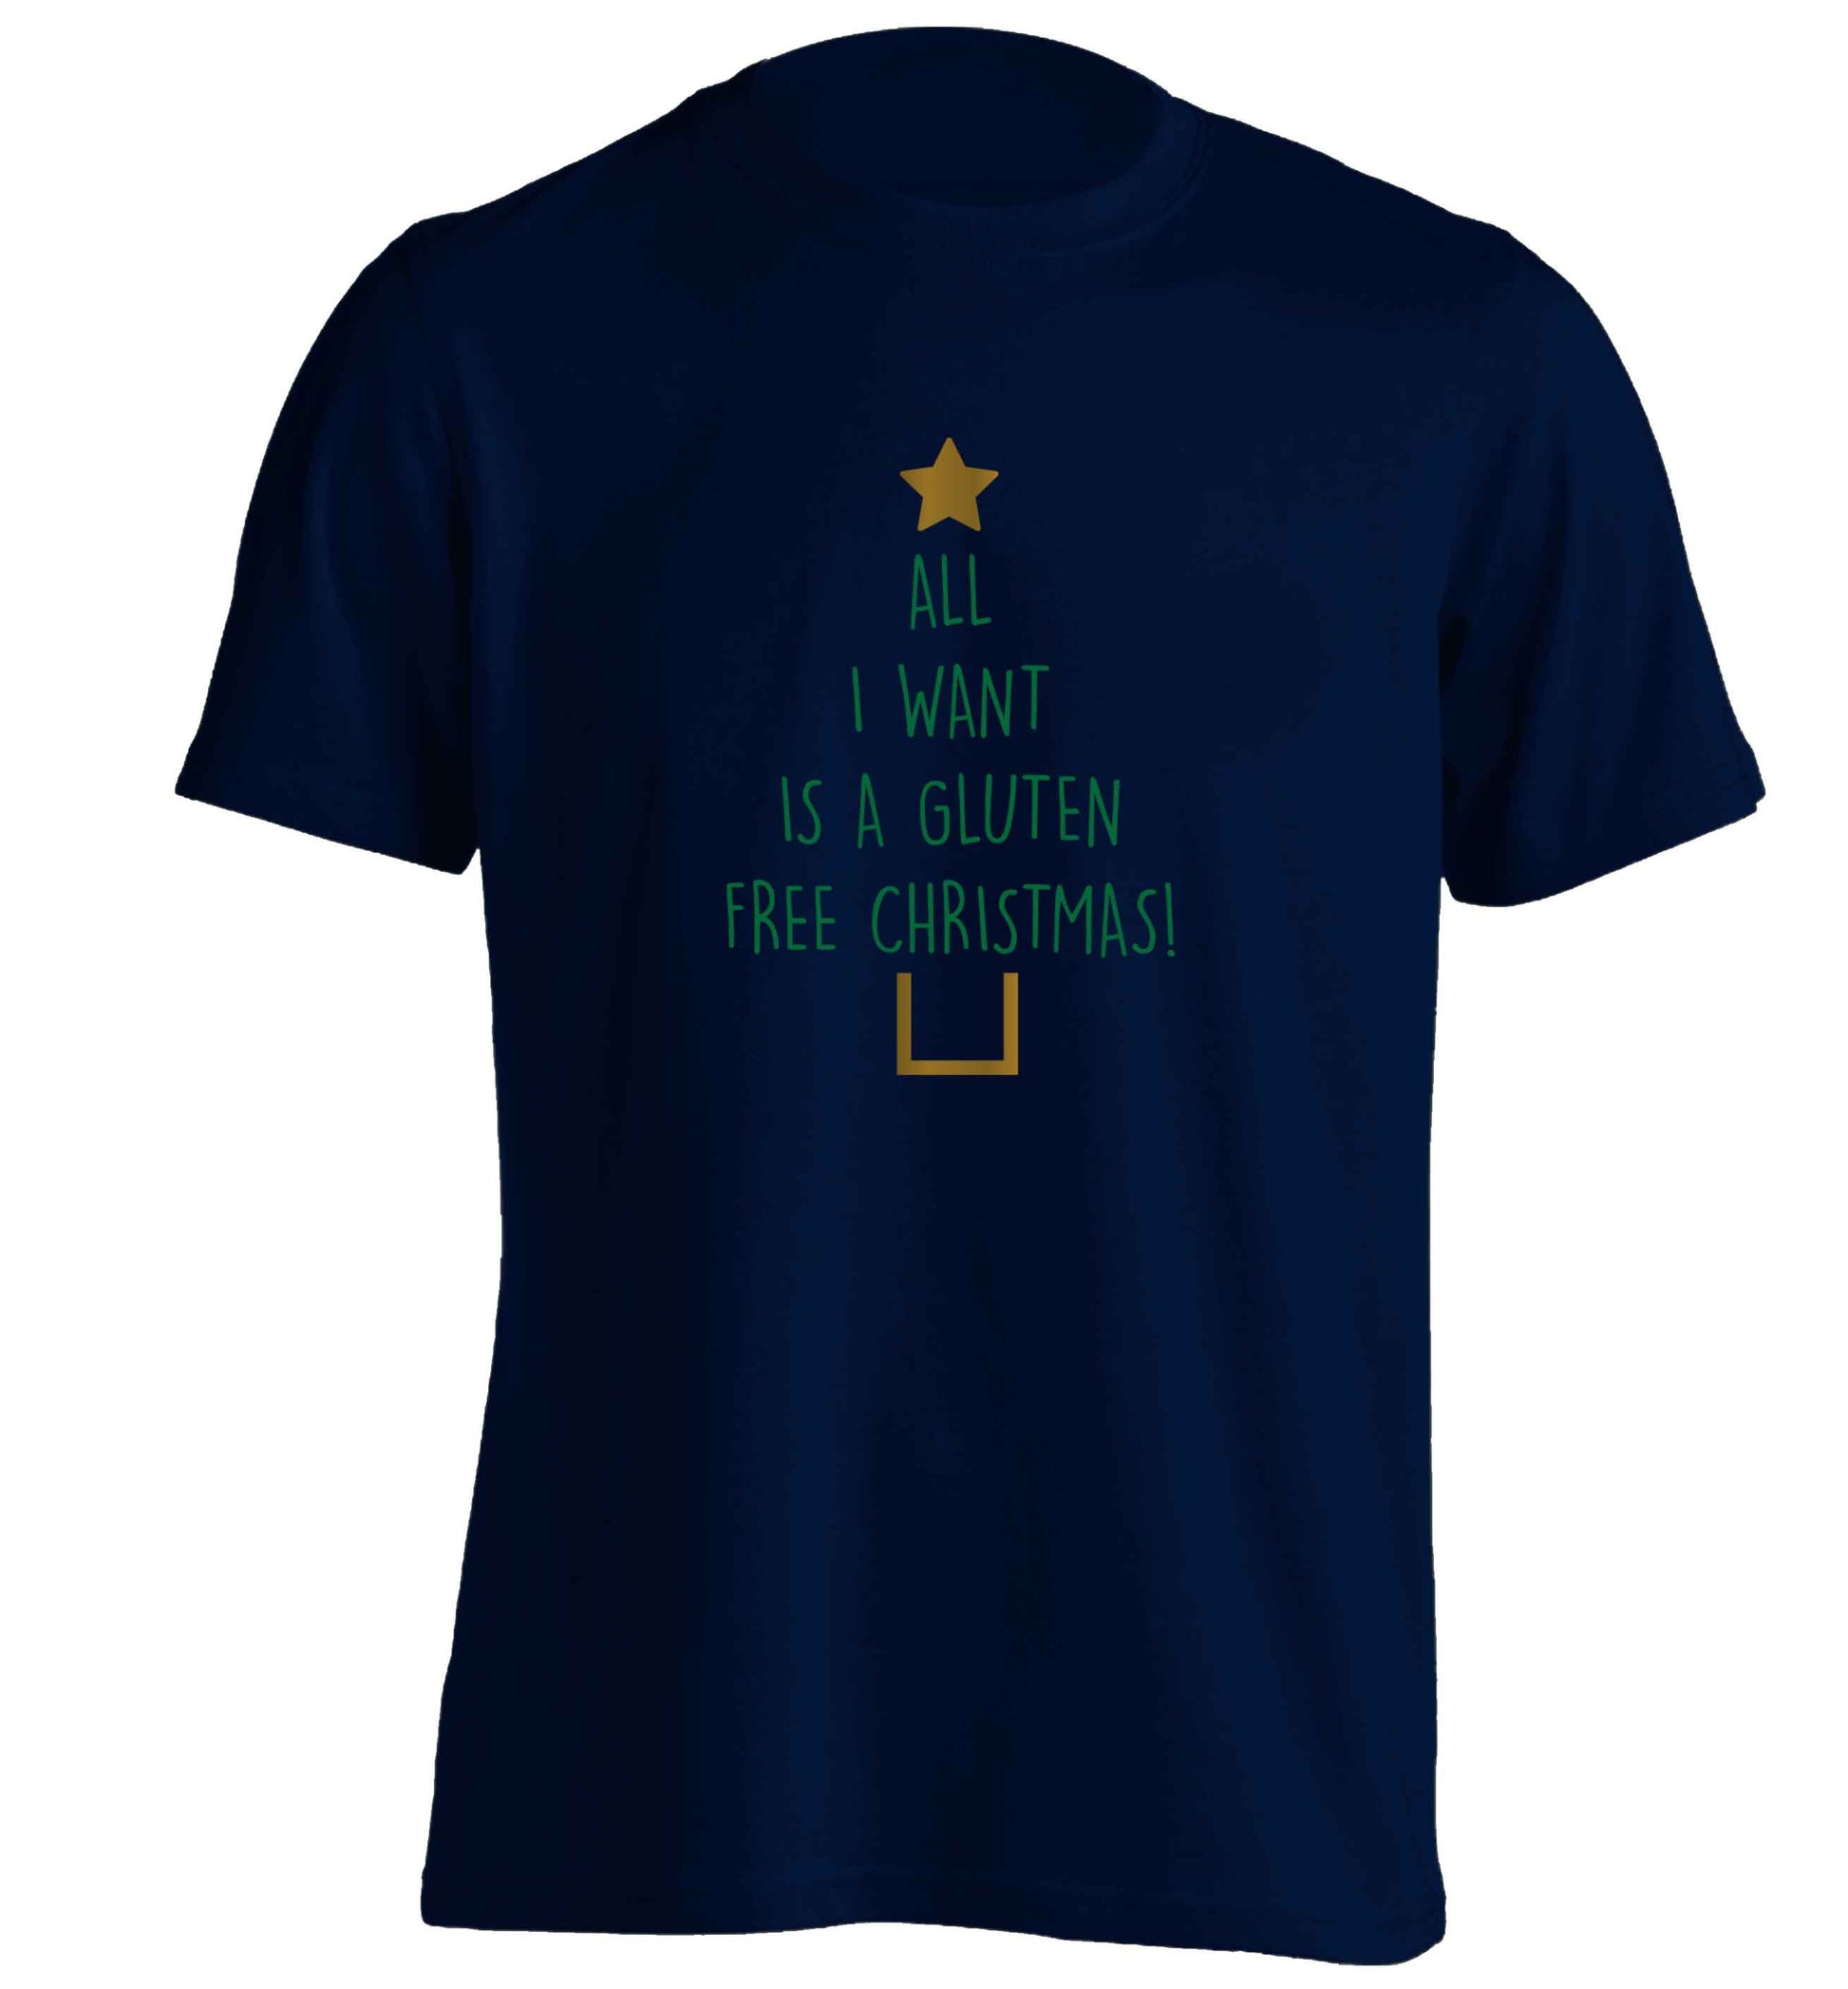 All I want is a gluten free Christmas adults unisex navy Tshirt 2XL